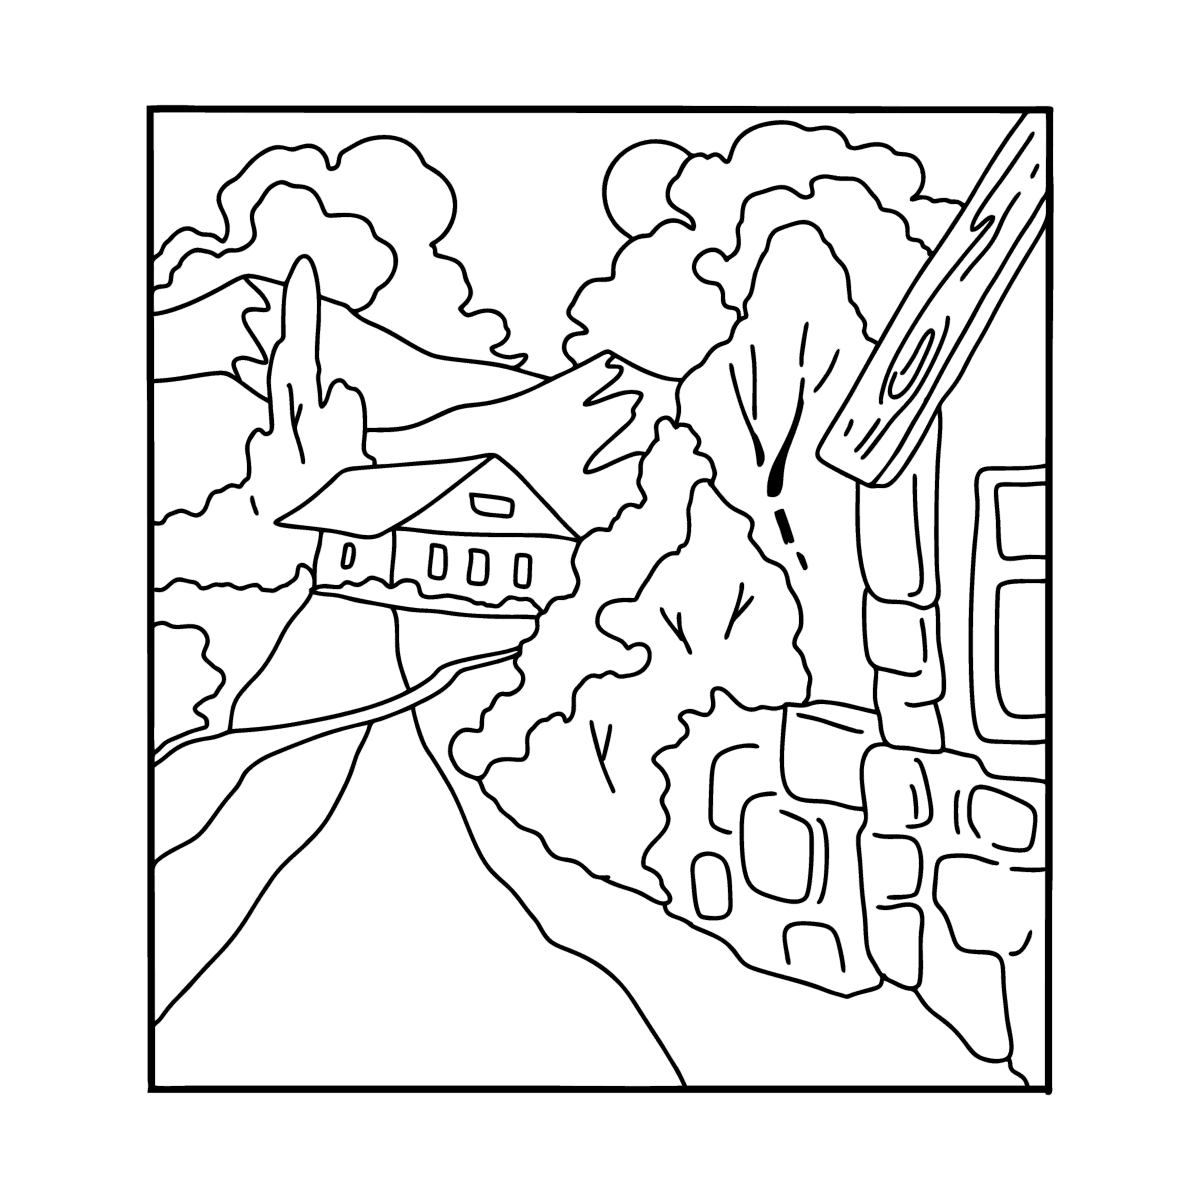 Beautiful village - Landscapes coloring pages for Adults